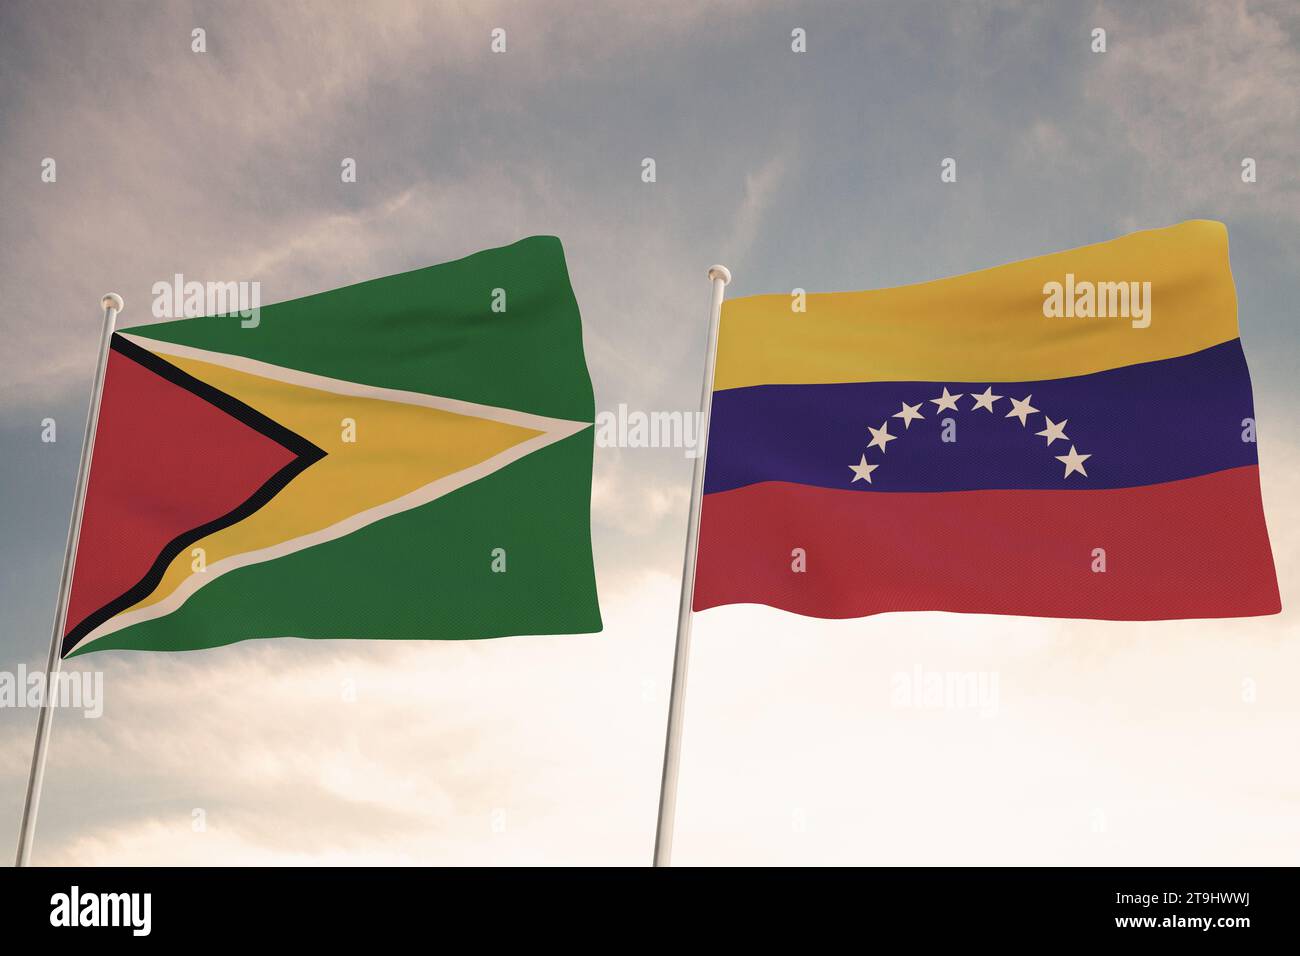 SPECTACULAR FLAGS OF GUYANA AND VENEZUELA WAVING WITH A BLUE SKY BACKGROUND CONFLICT RELATIONSHIPS Stock Photo